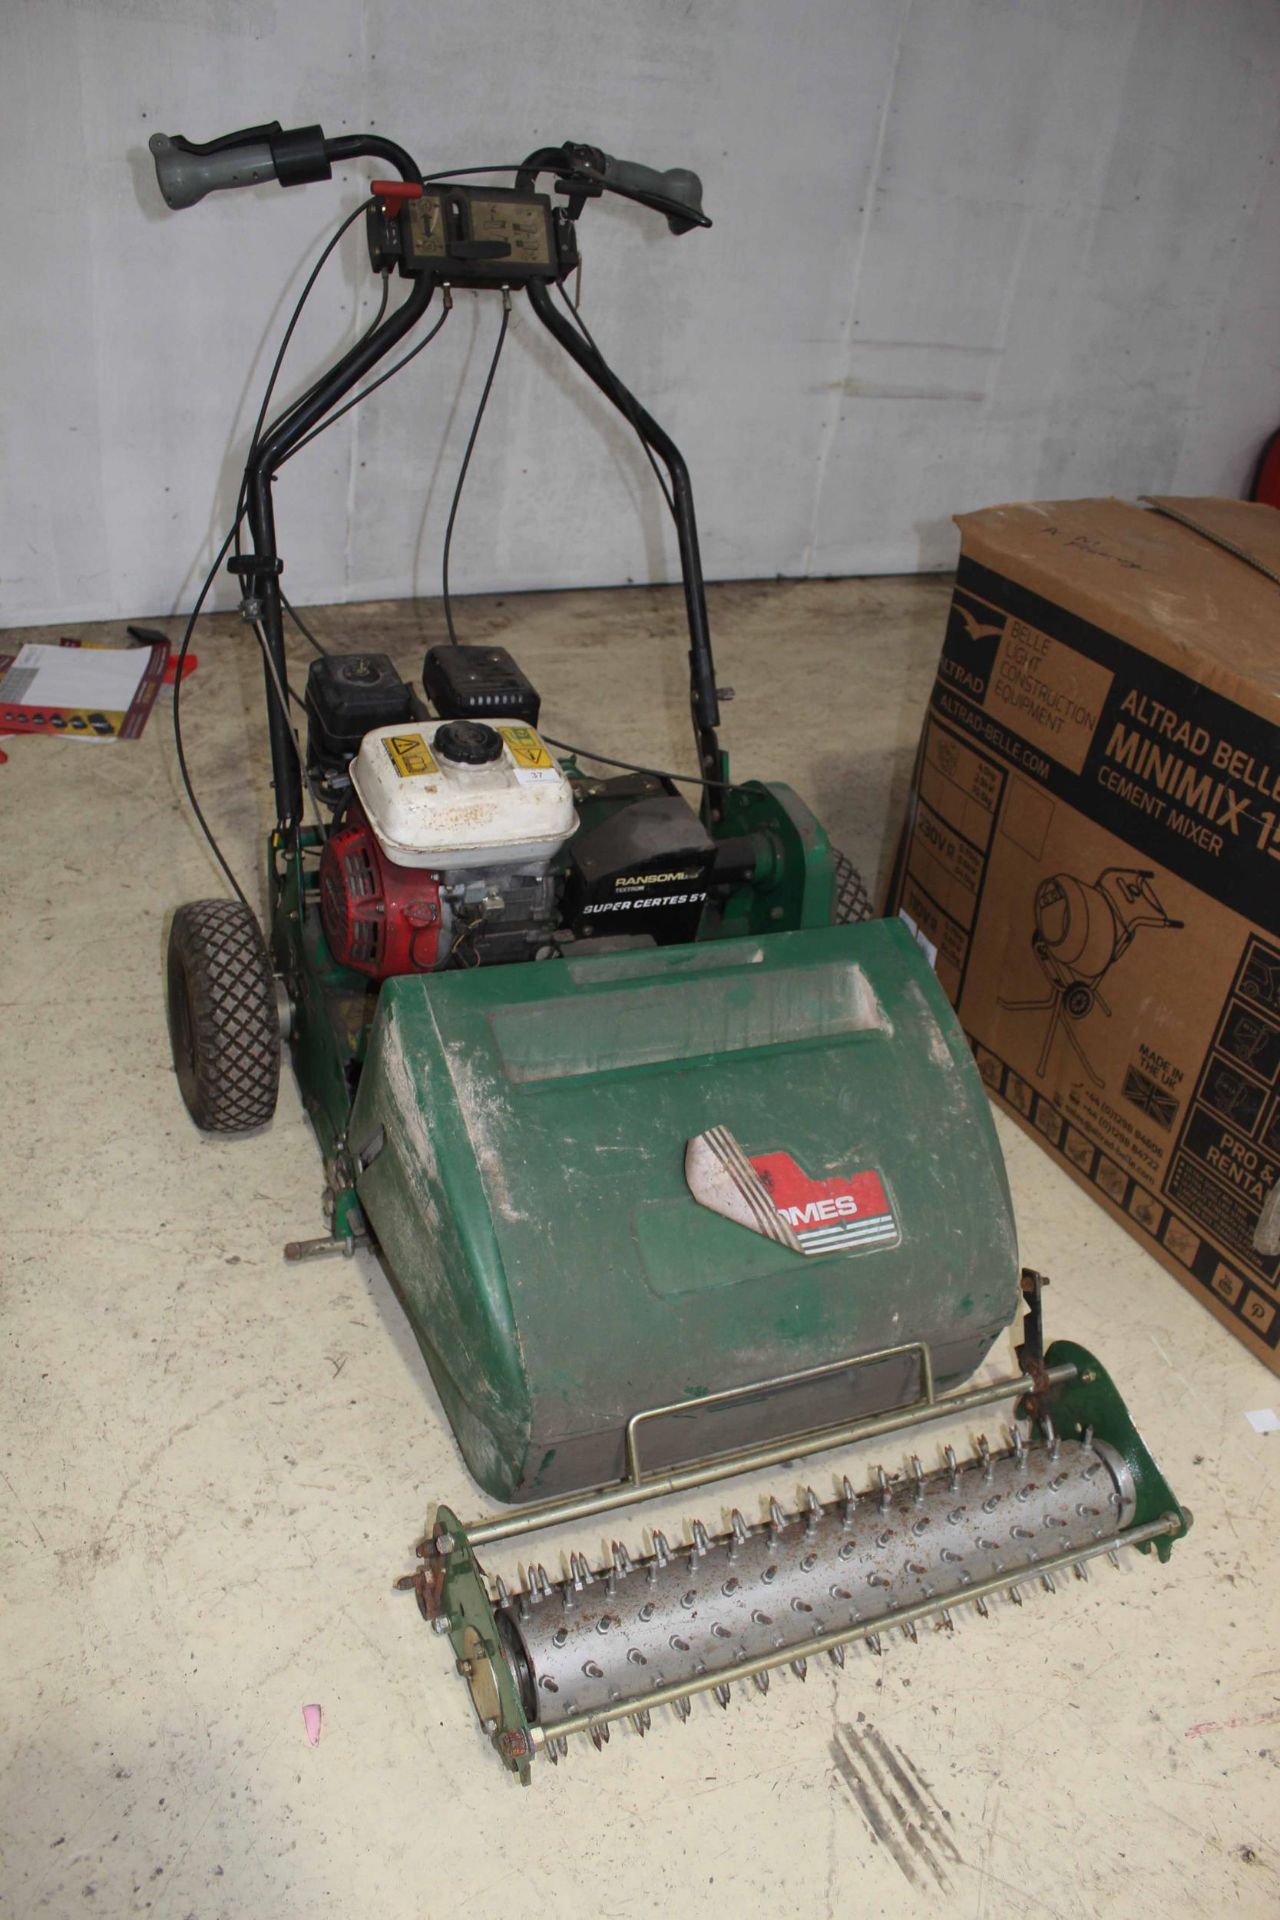 RANSOMES SUPER CERTES 51 MOWER WITH AERATOR ATTACHMENT AND BOX IN WORKING ORDER NO VAT